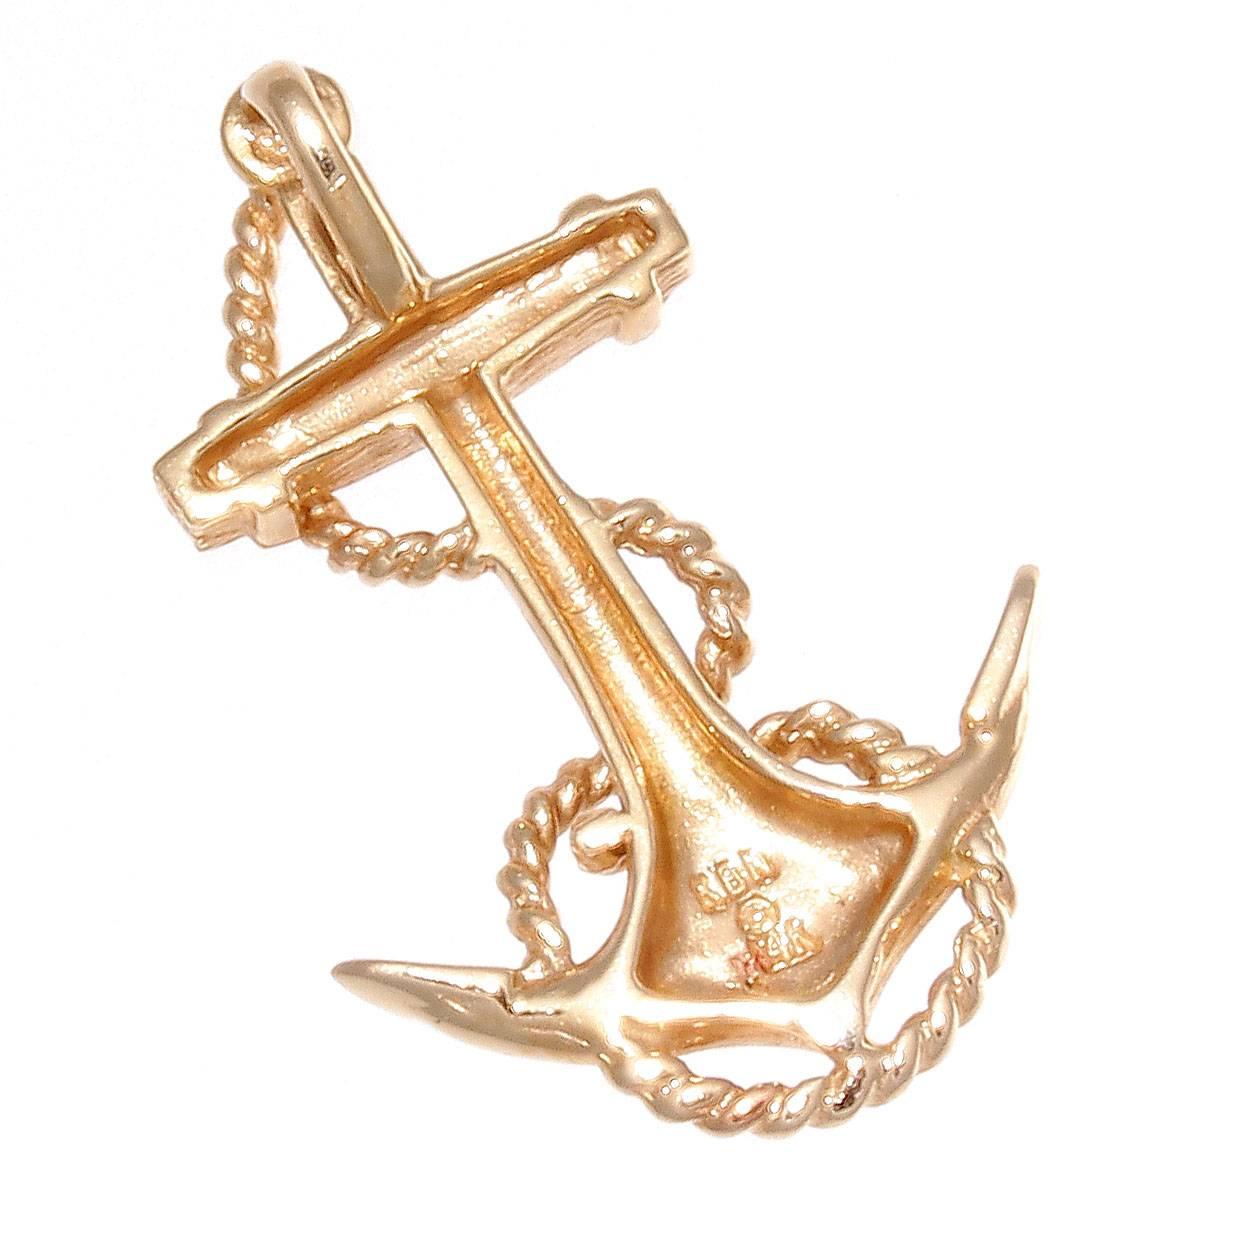 The anchor represents stability and strength, something useful to have when you're in the home port with your loved one.  Crafted in 14k gold and is 1-1/4 inches x 3/4 inches.